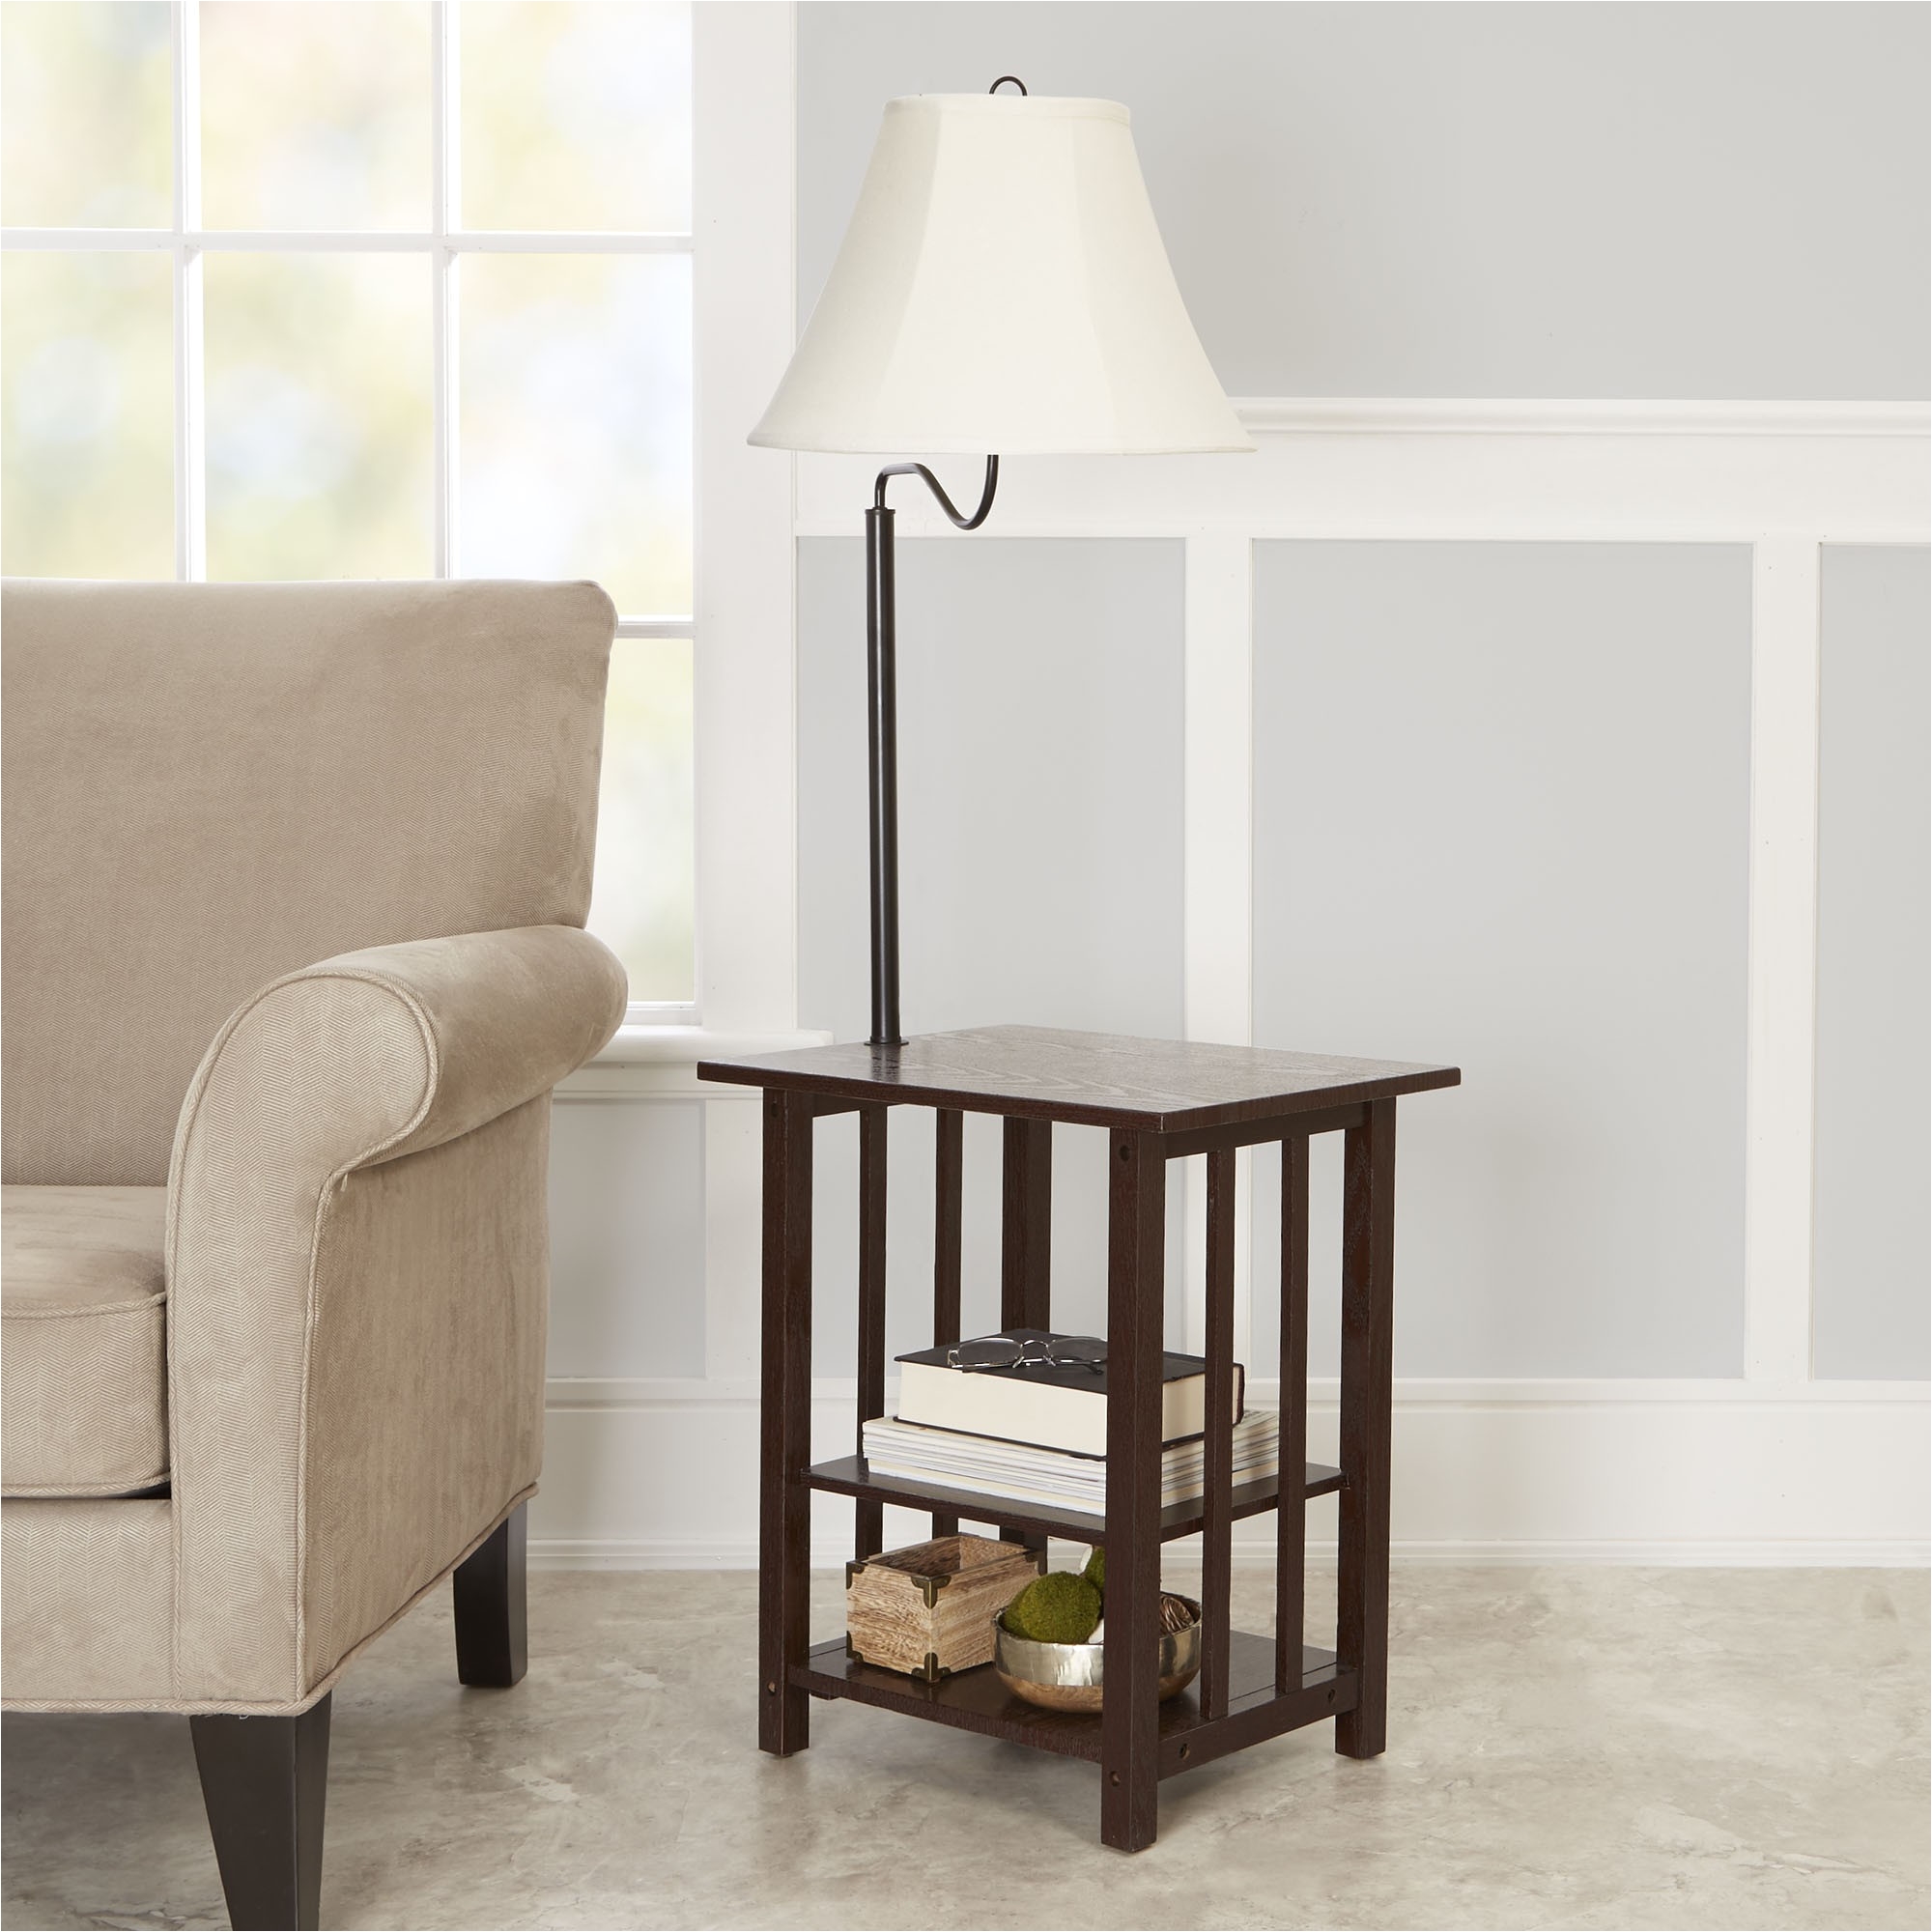 End Table with attached Lamp and Magazine Rack 17 Elegant End Table with attached Lamp and Magazine Rack